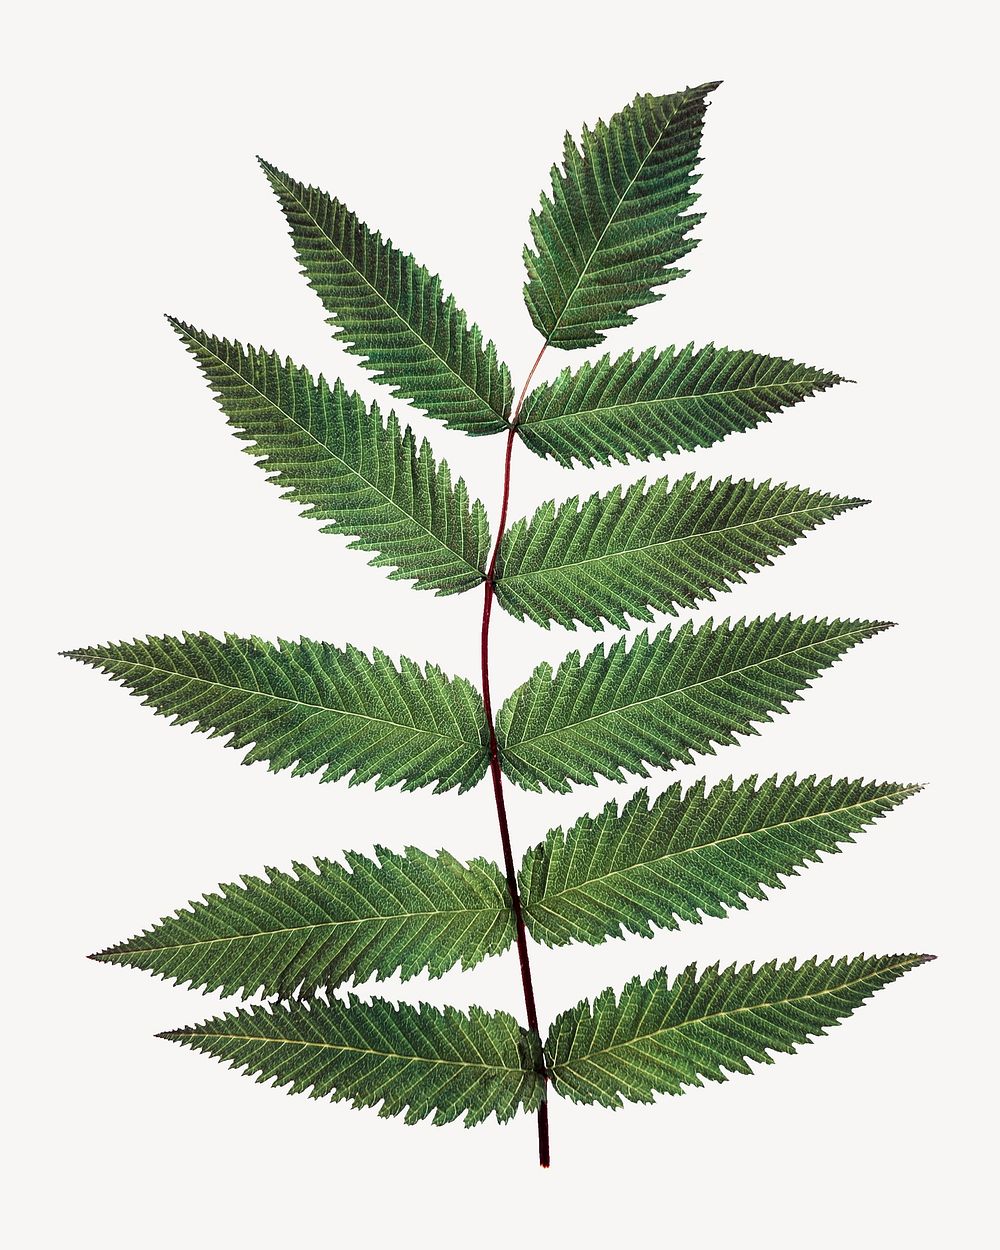 Leaf branch, isolated plant image